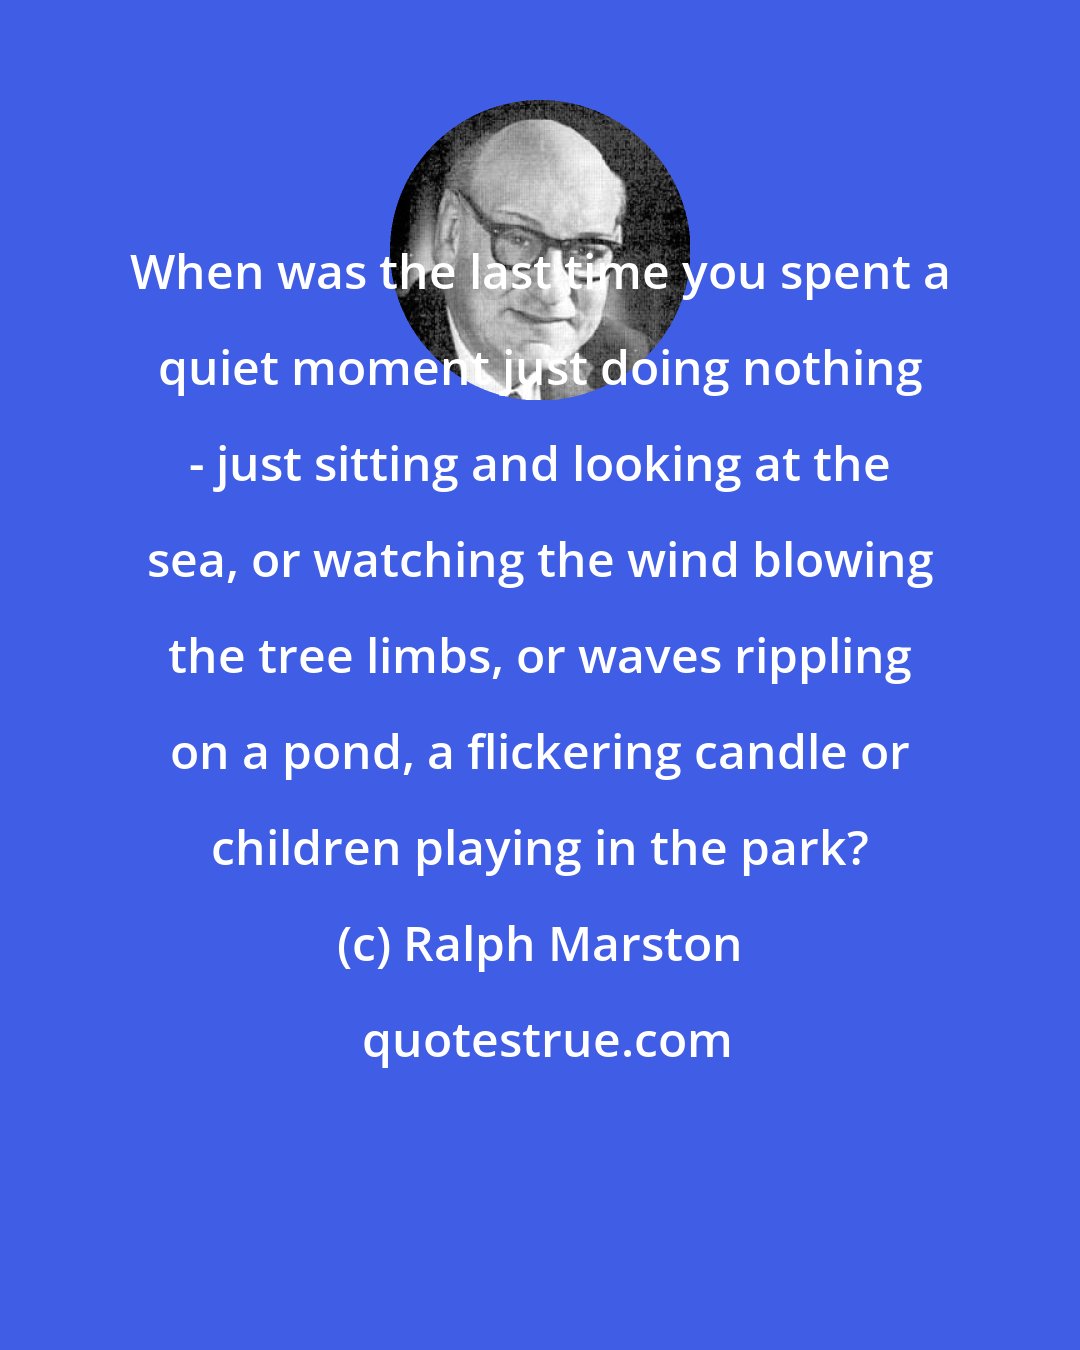 Ralph Marston: When was the last time you spent a quiet moment just doing nothing - just sitting and looking at the sea, or watching the wind blowing the tree limbs, or waves rippling on a pond, a flickering candle or children playing in the park?